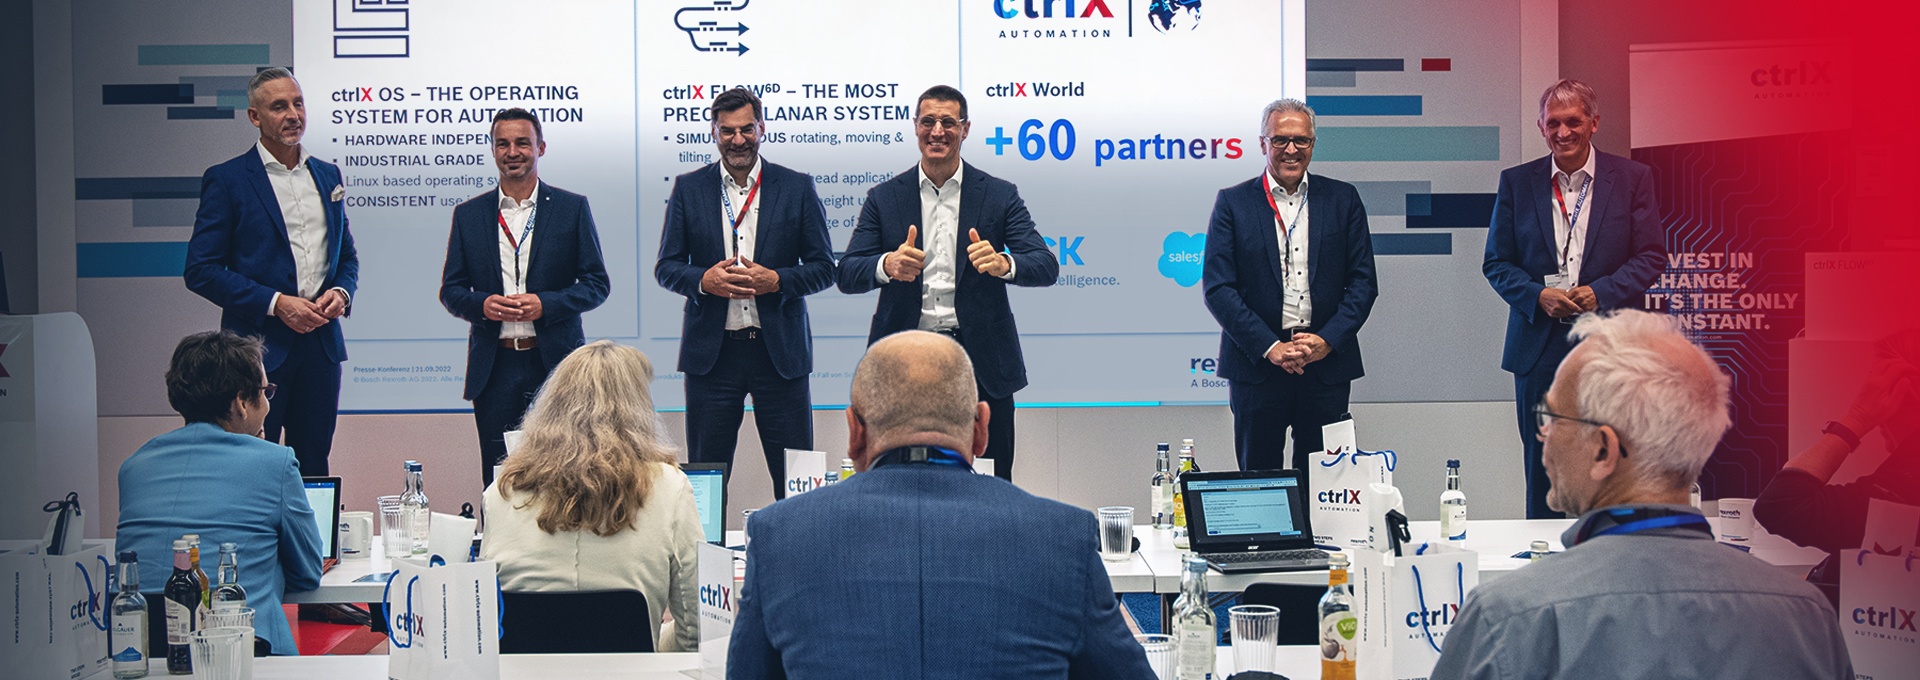 Participants of the ctrlX AUTOMATION trade press conference 2021 in Lohr am Main